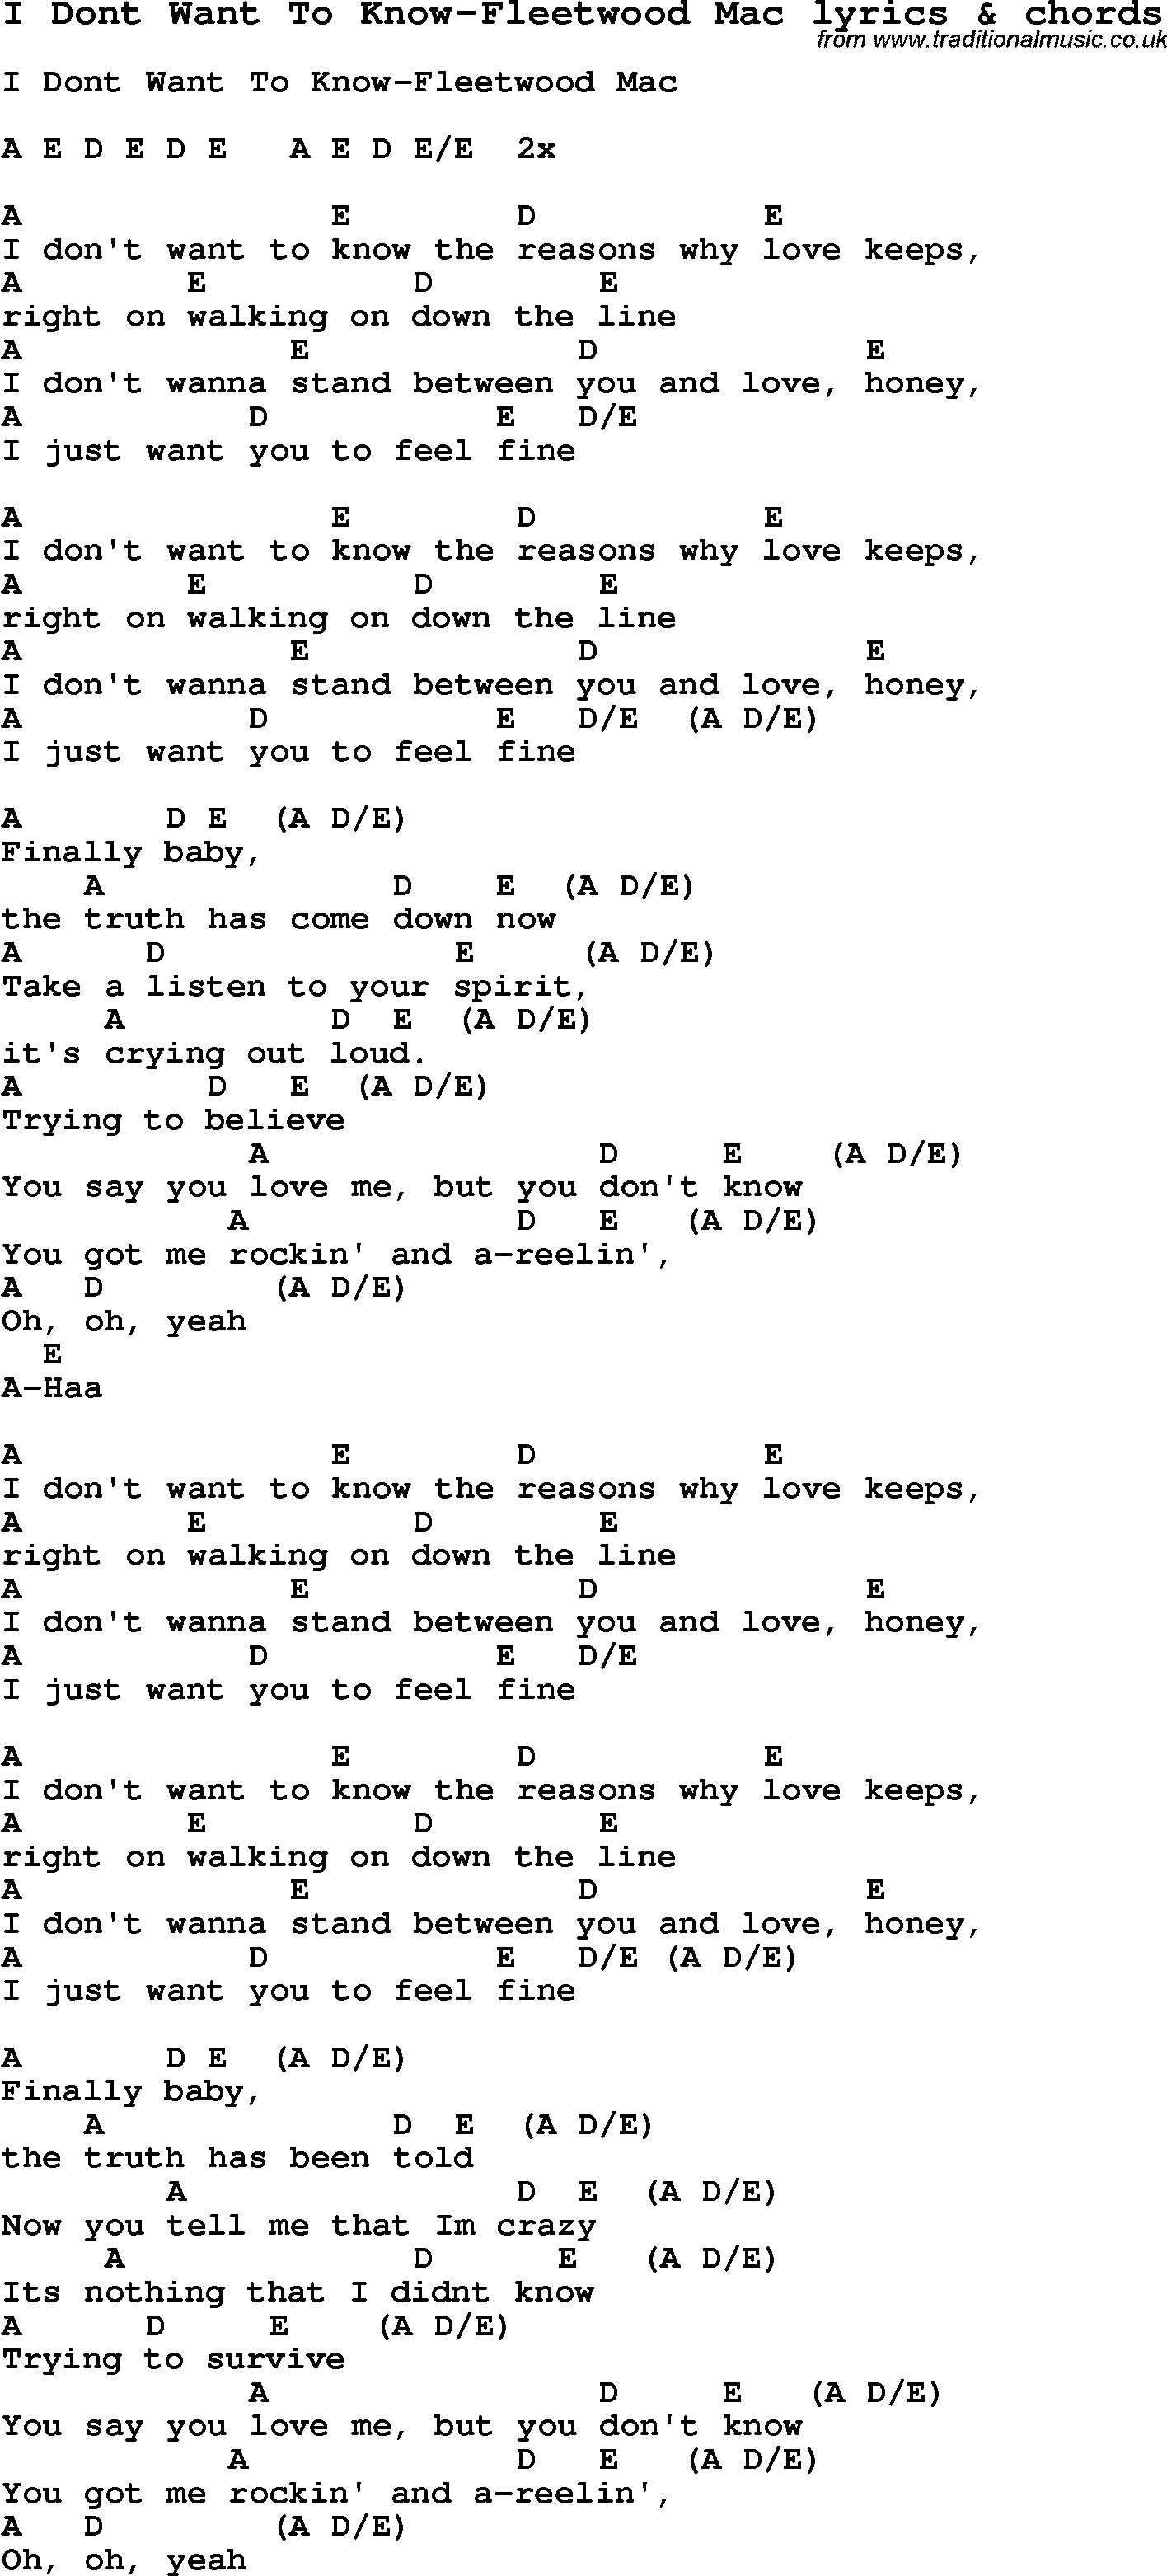 Love Song Lyrics for: I Dont Want To Know-Fleetwood Mac with chords for Ukulele, Guitar Banjo etc.